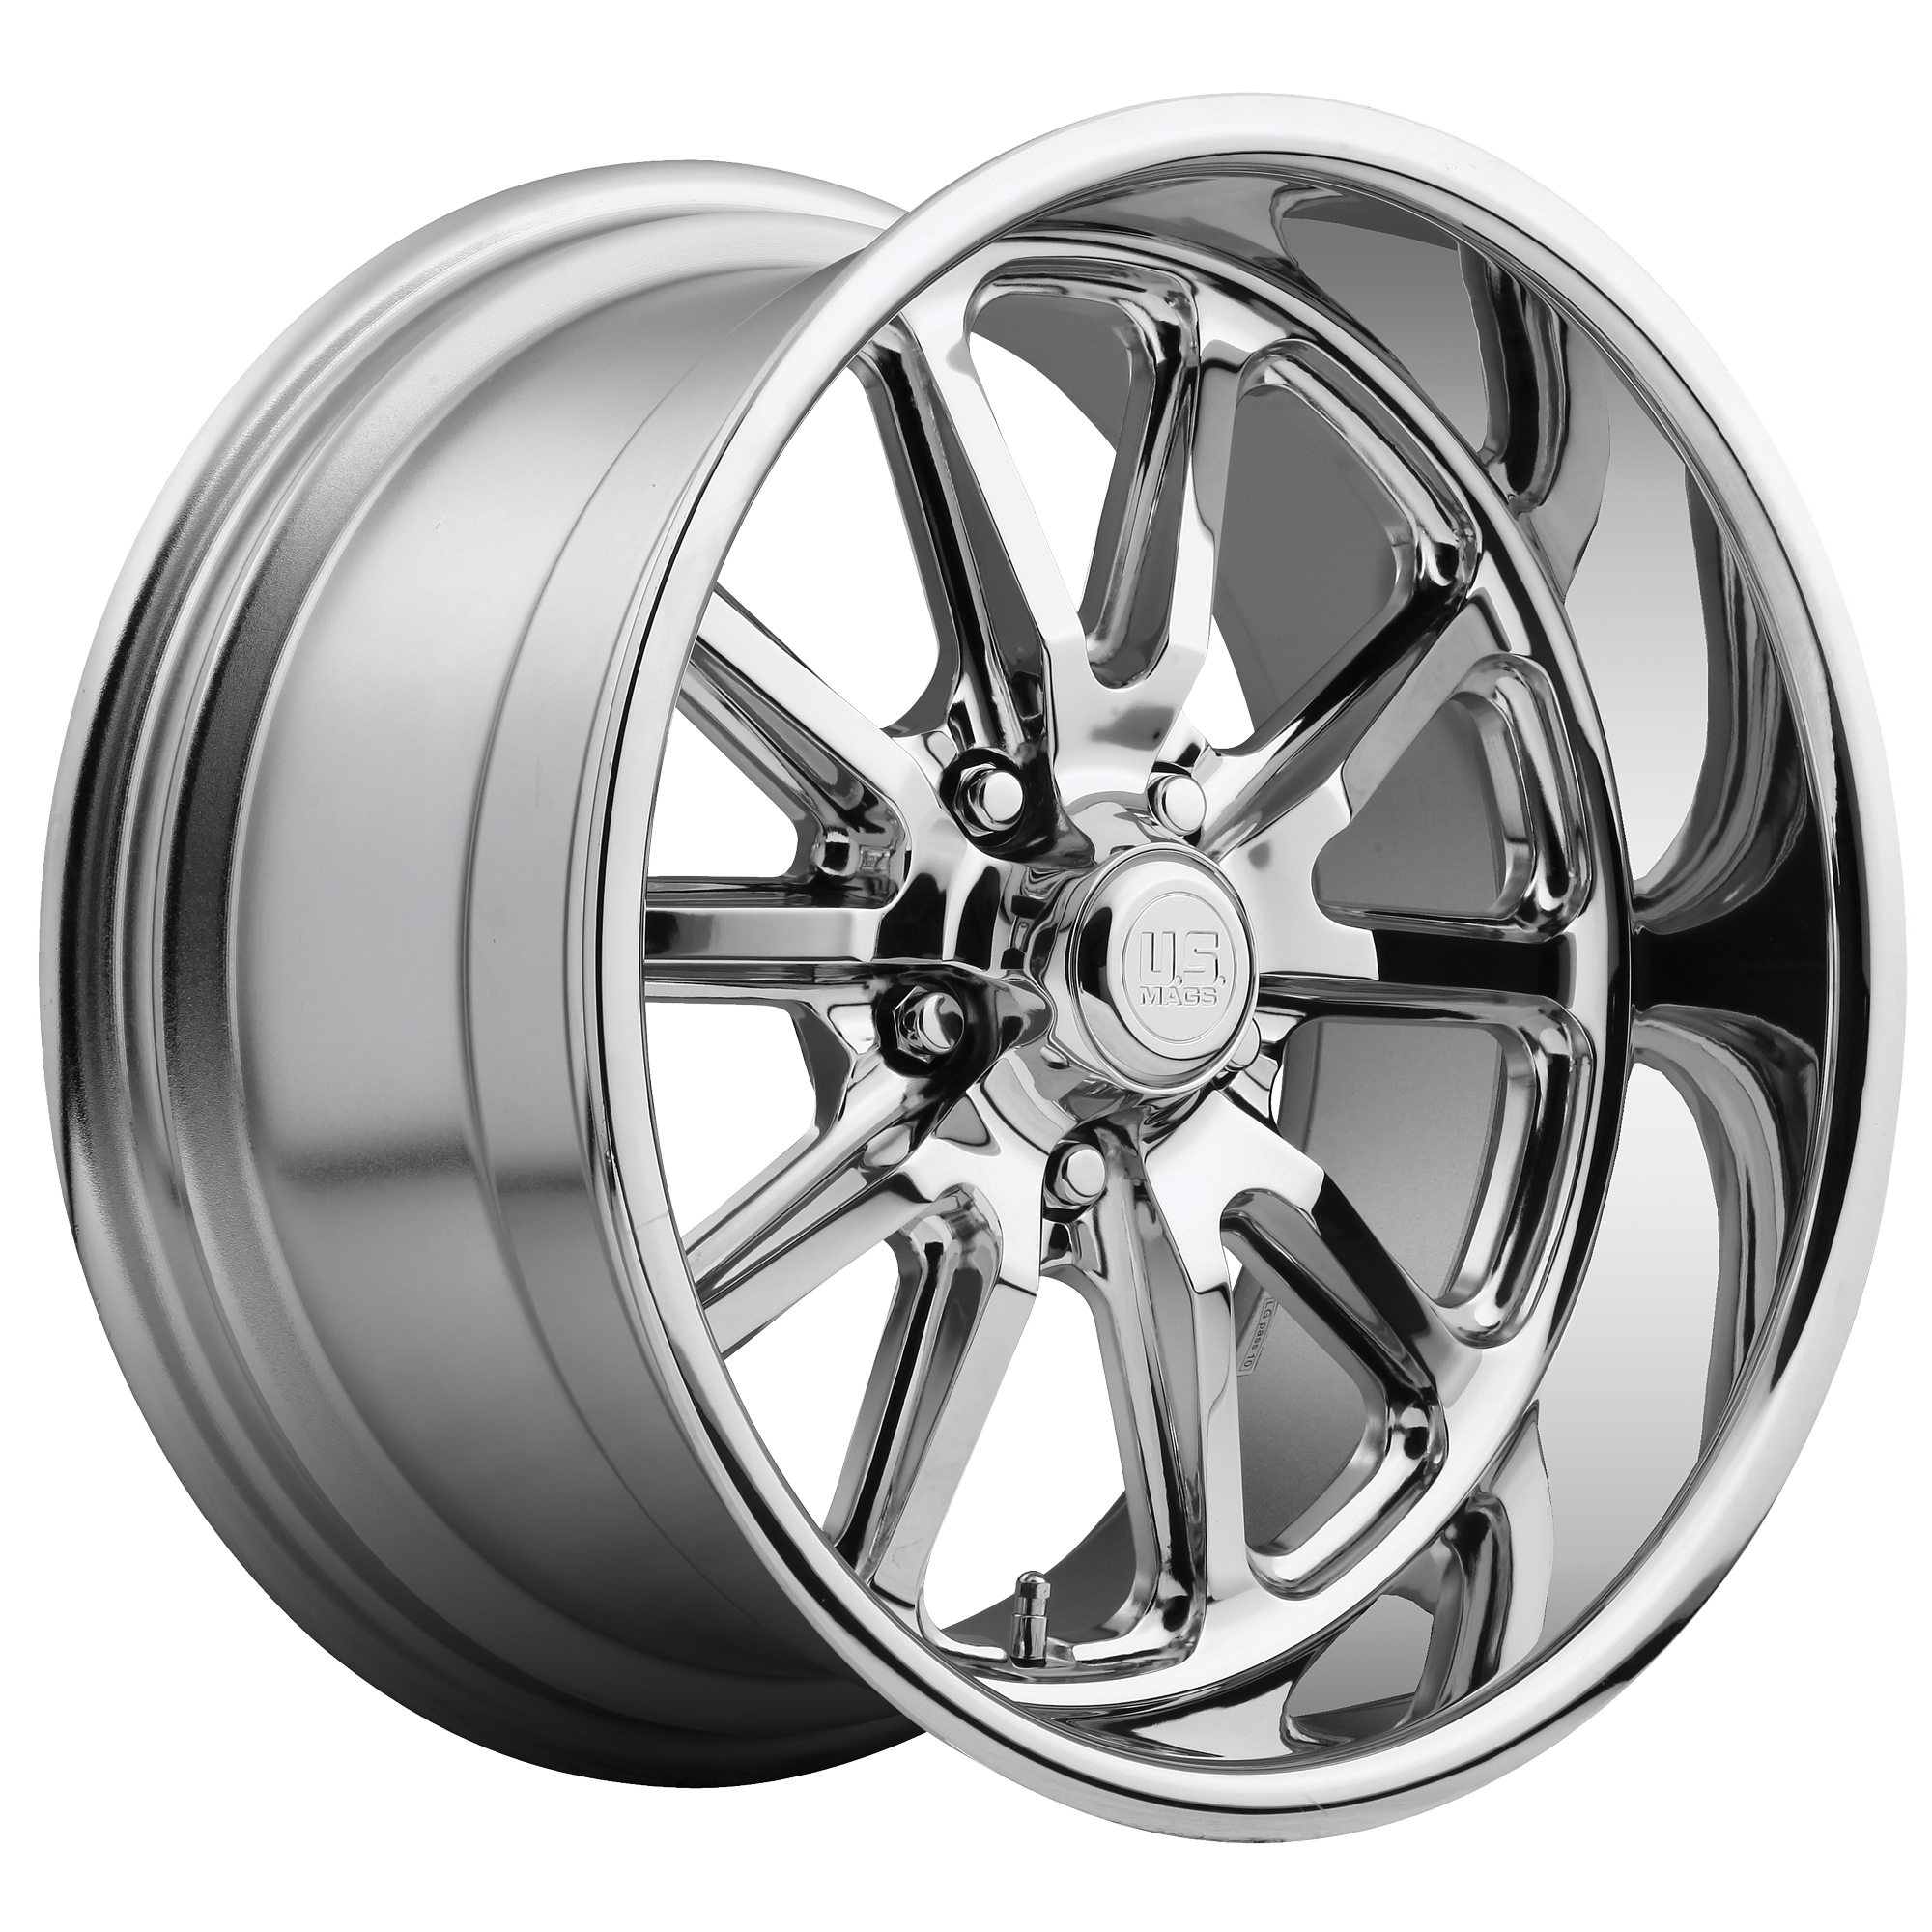 RAMBLER 15x7 5x120.65 CHROME PLATED (1 mm) - Tires and Engine Performance